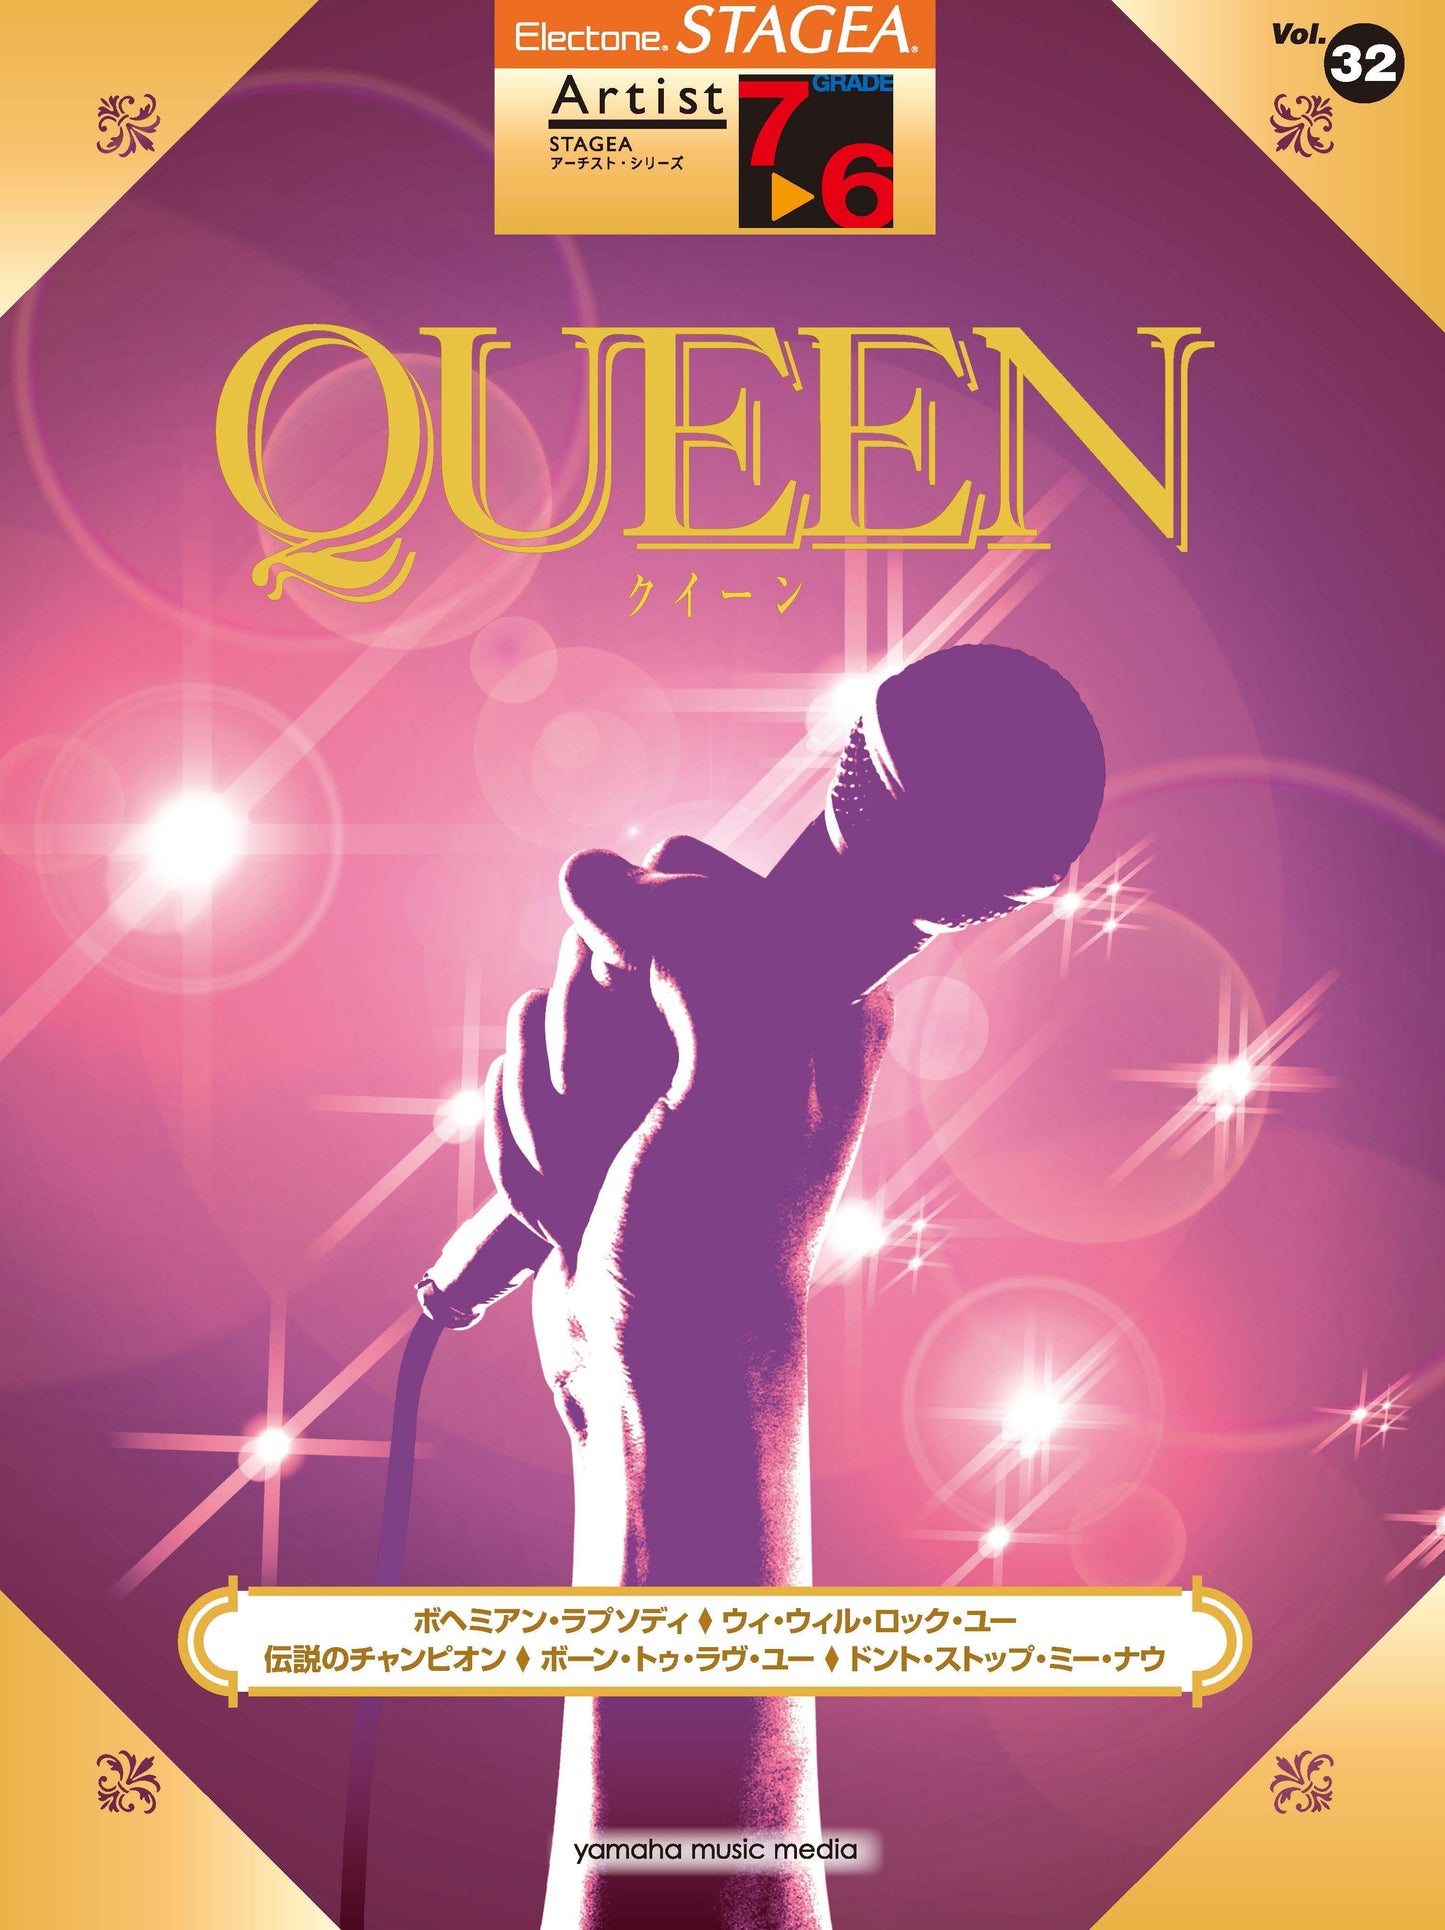 STAGEA アーチスト 7～6級 Vol.32 QUEEN